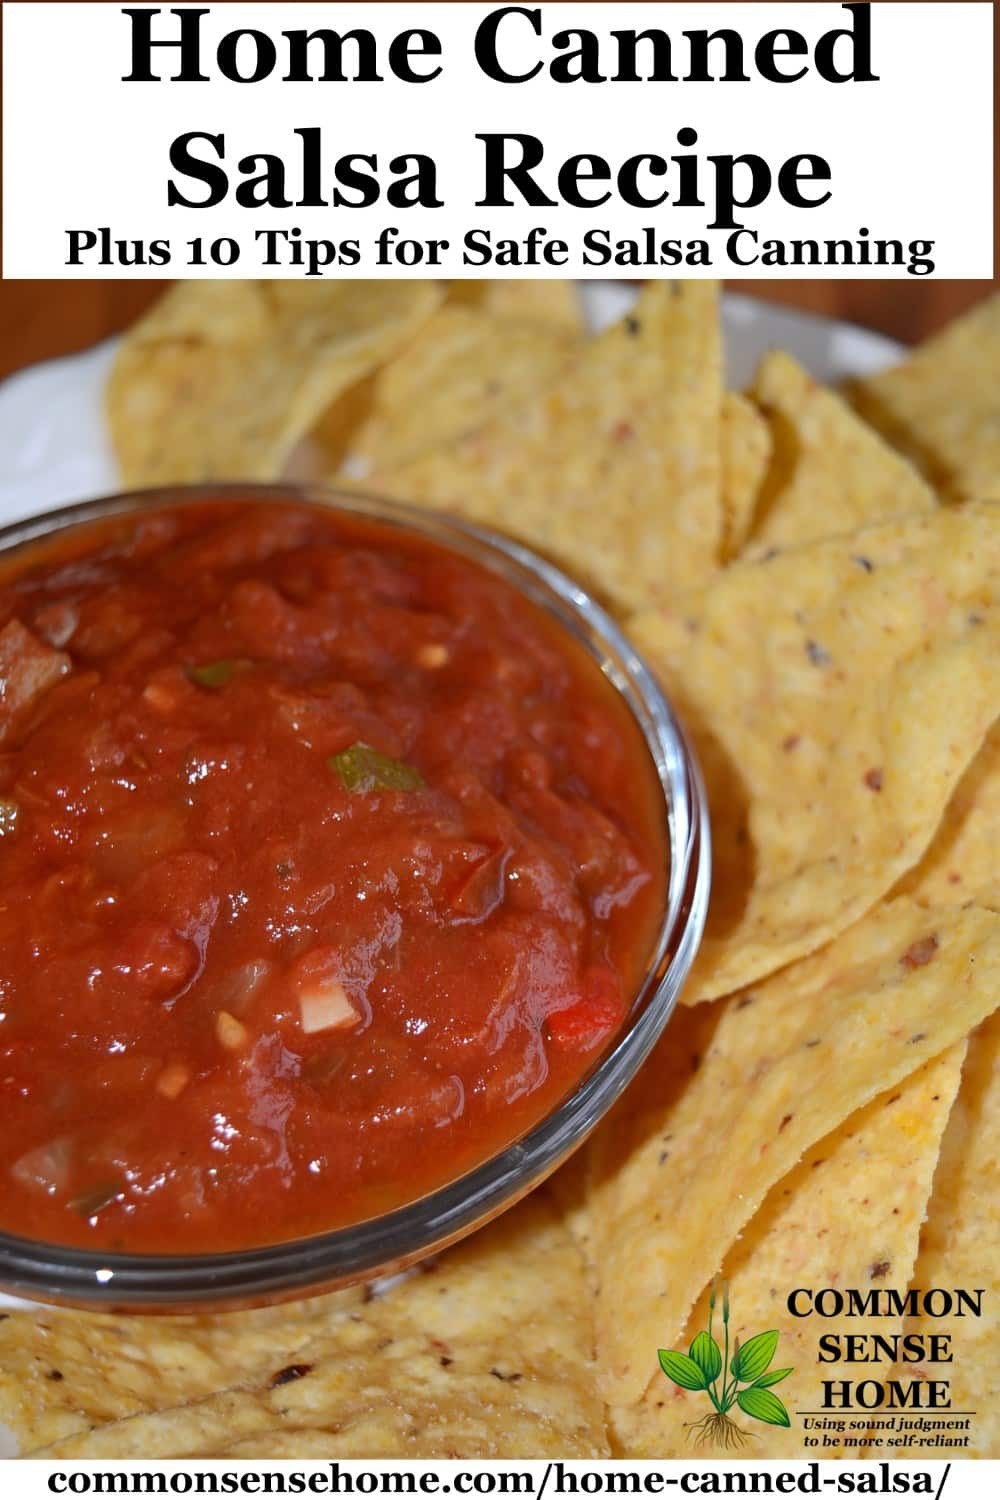 Homemade Salsa Recipe For Canning
 Home Canned Salsa Recipe Plus 10 Tips for Canning Salsa